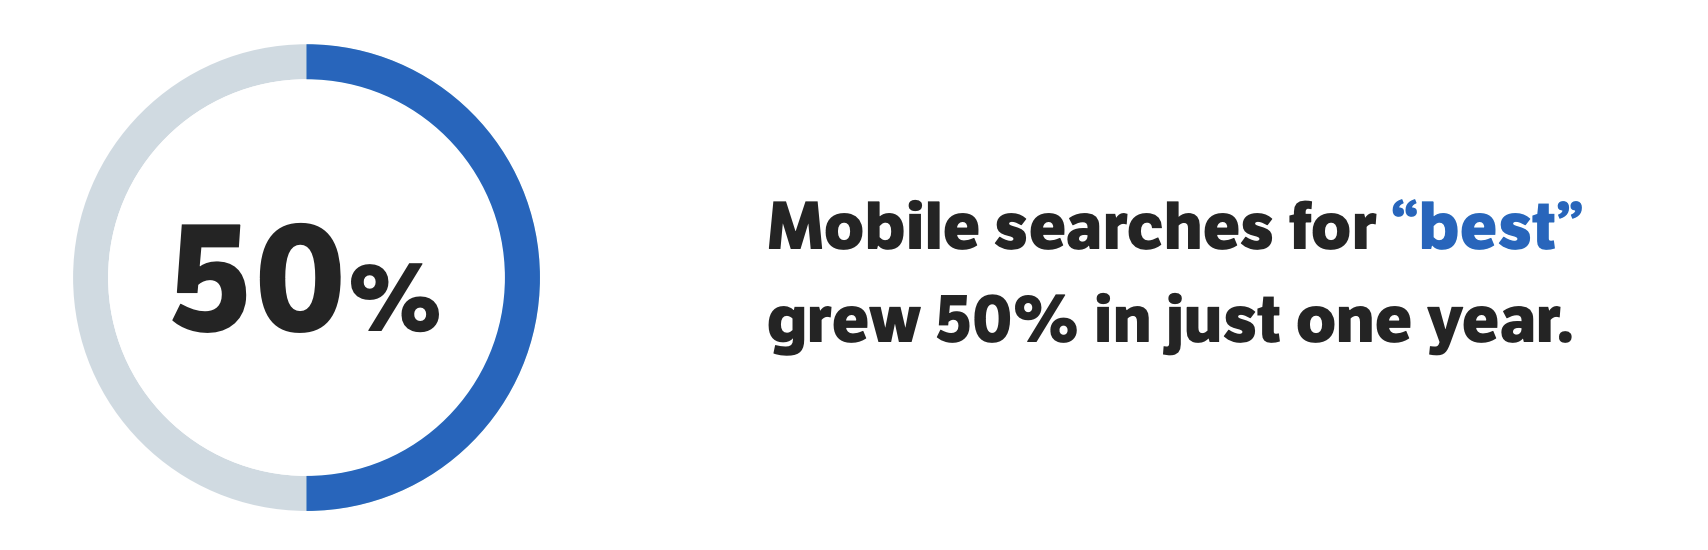 Best Near Me Mobile Searches Stat - Consumer Search Behavior